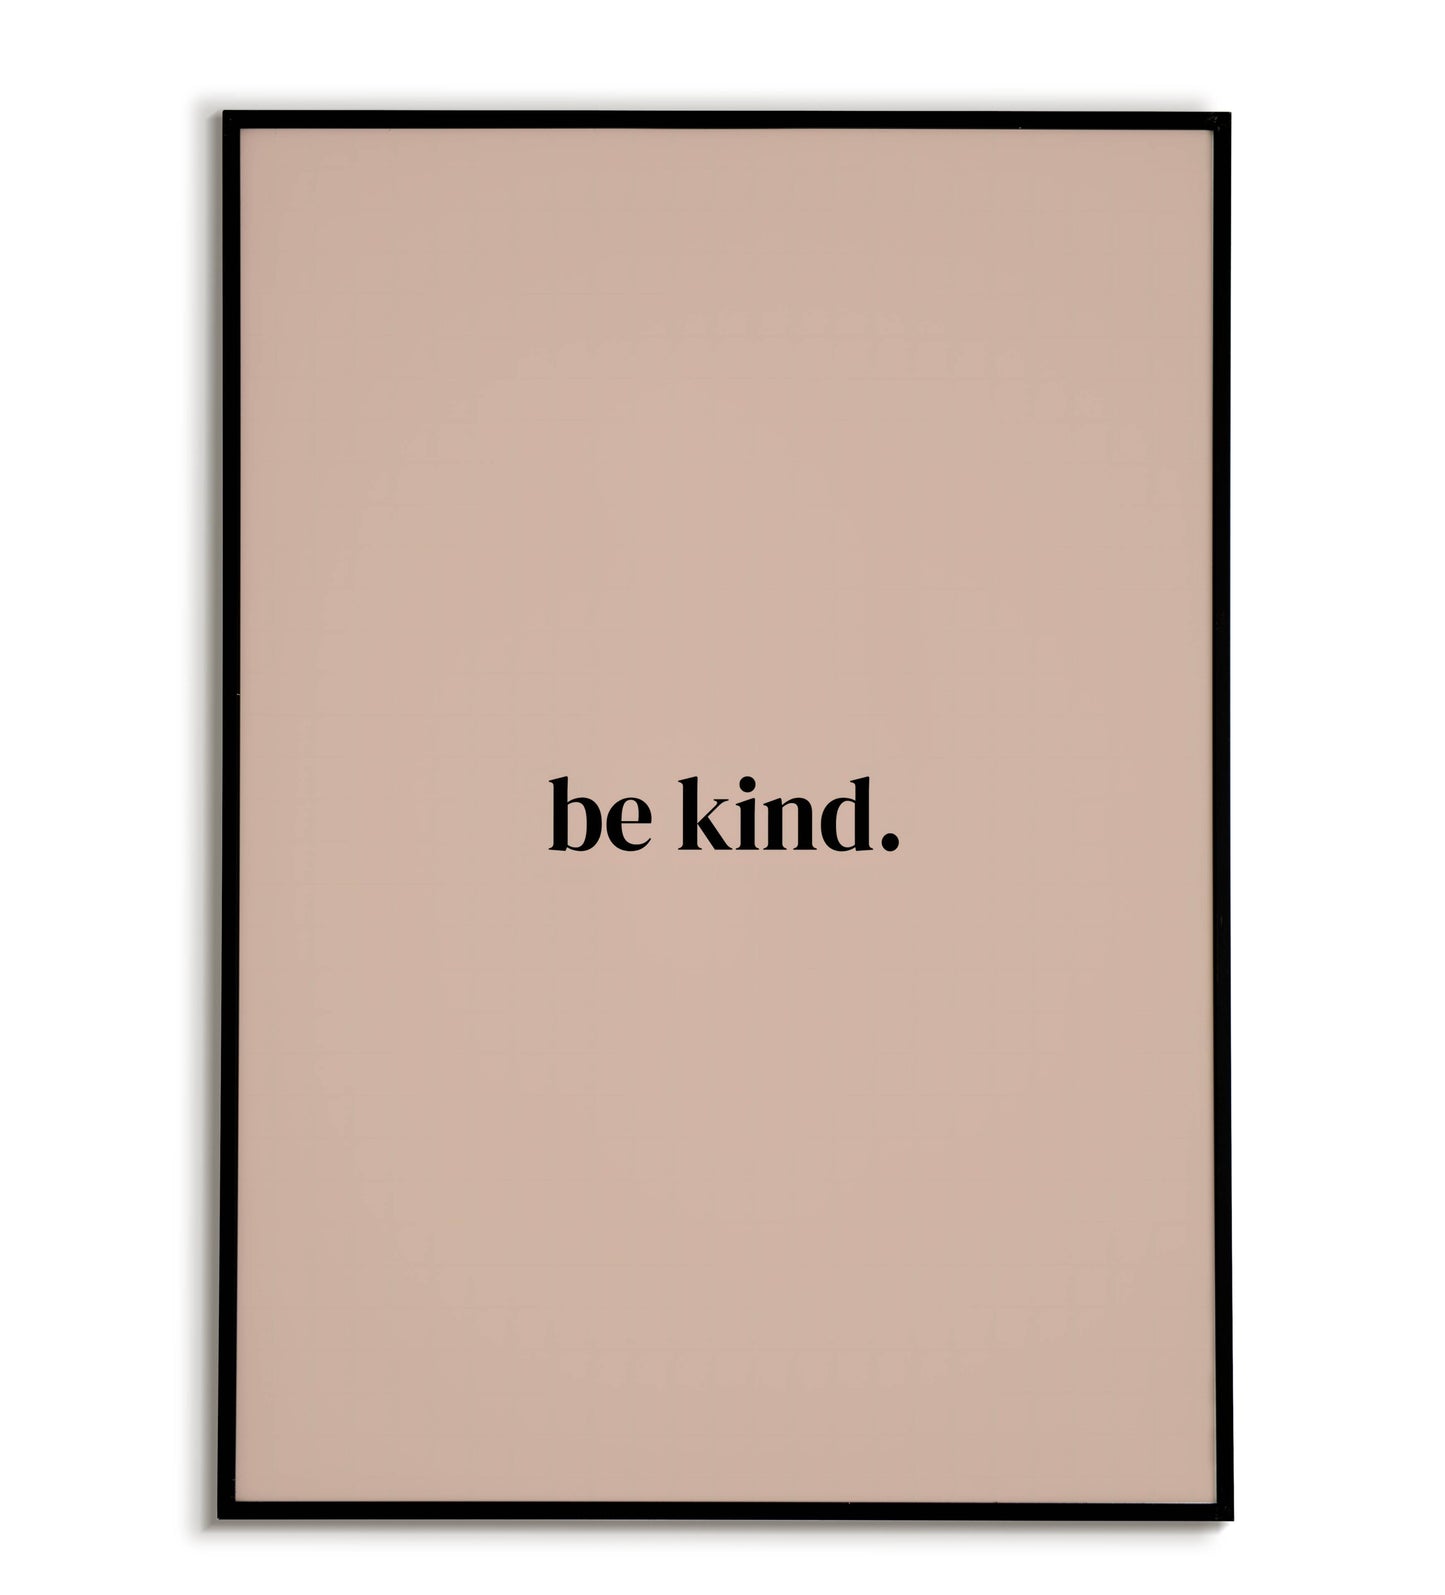 Inspirational "Be kind" printable poster, spread positivity and encourage kindness.	